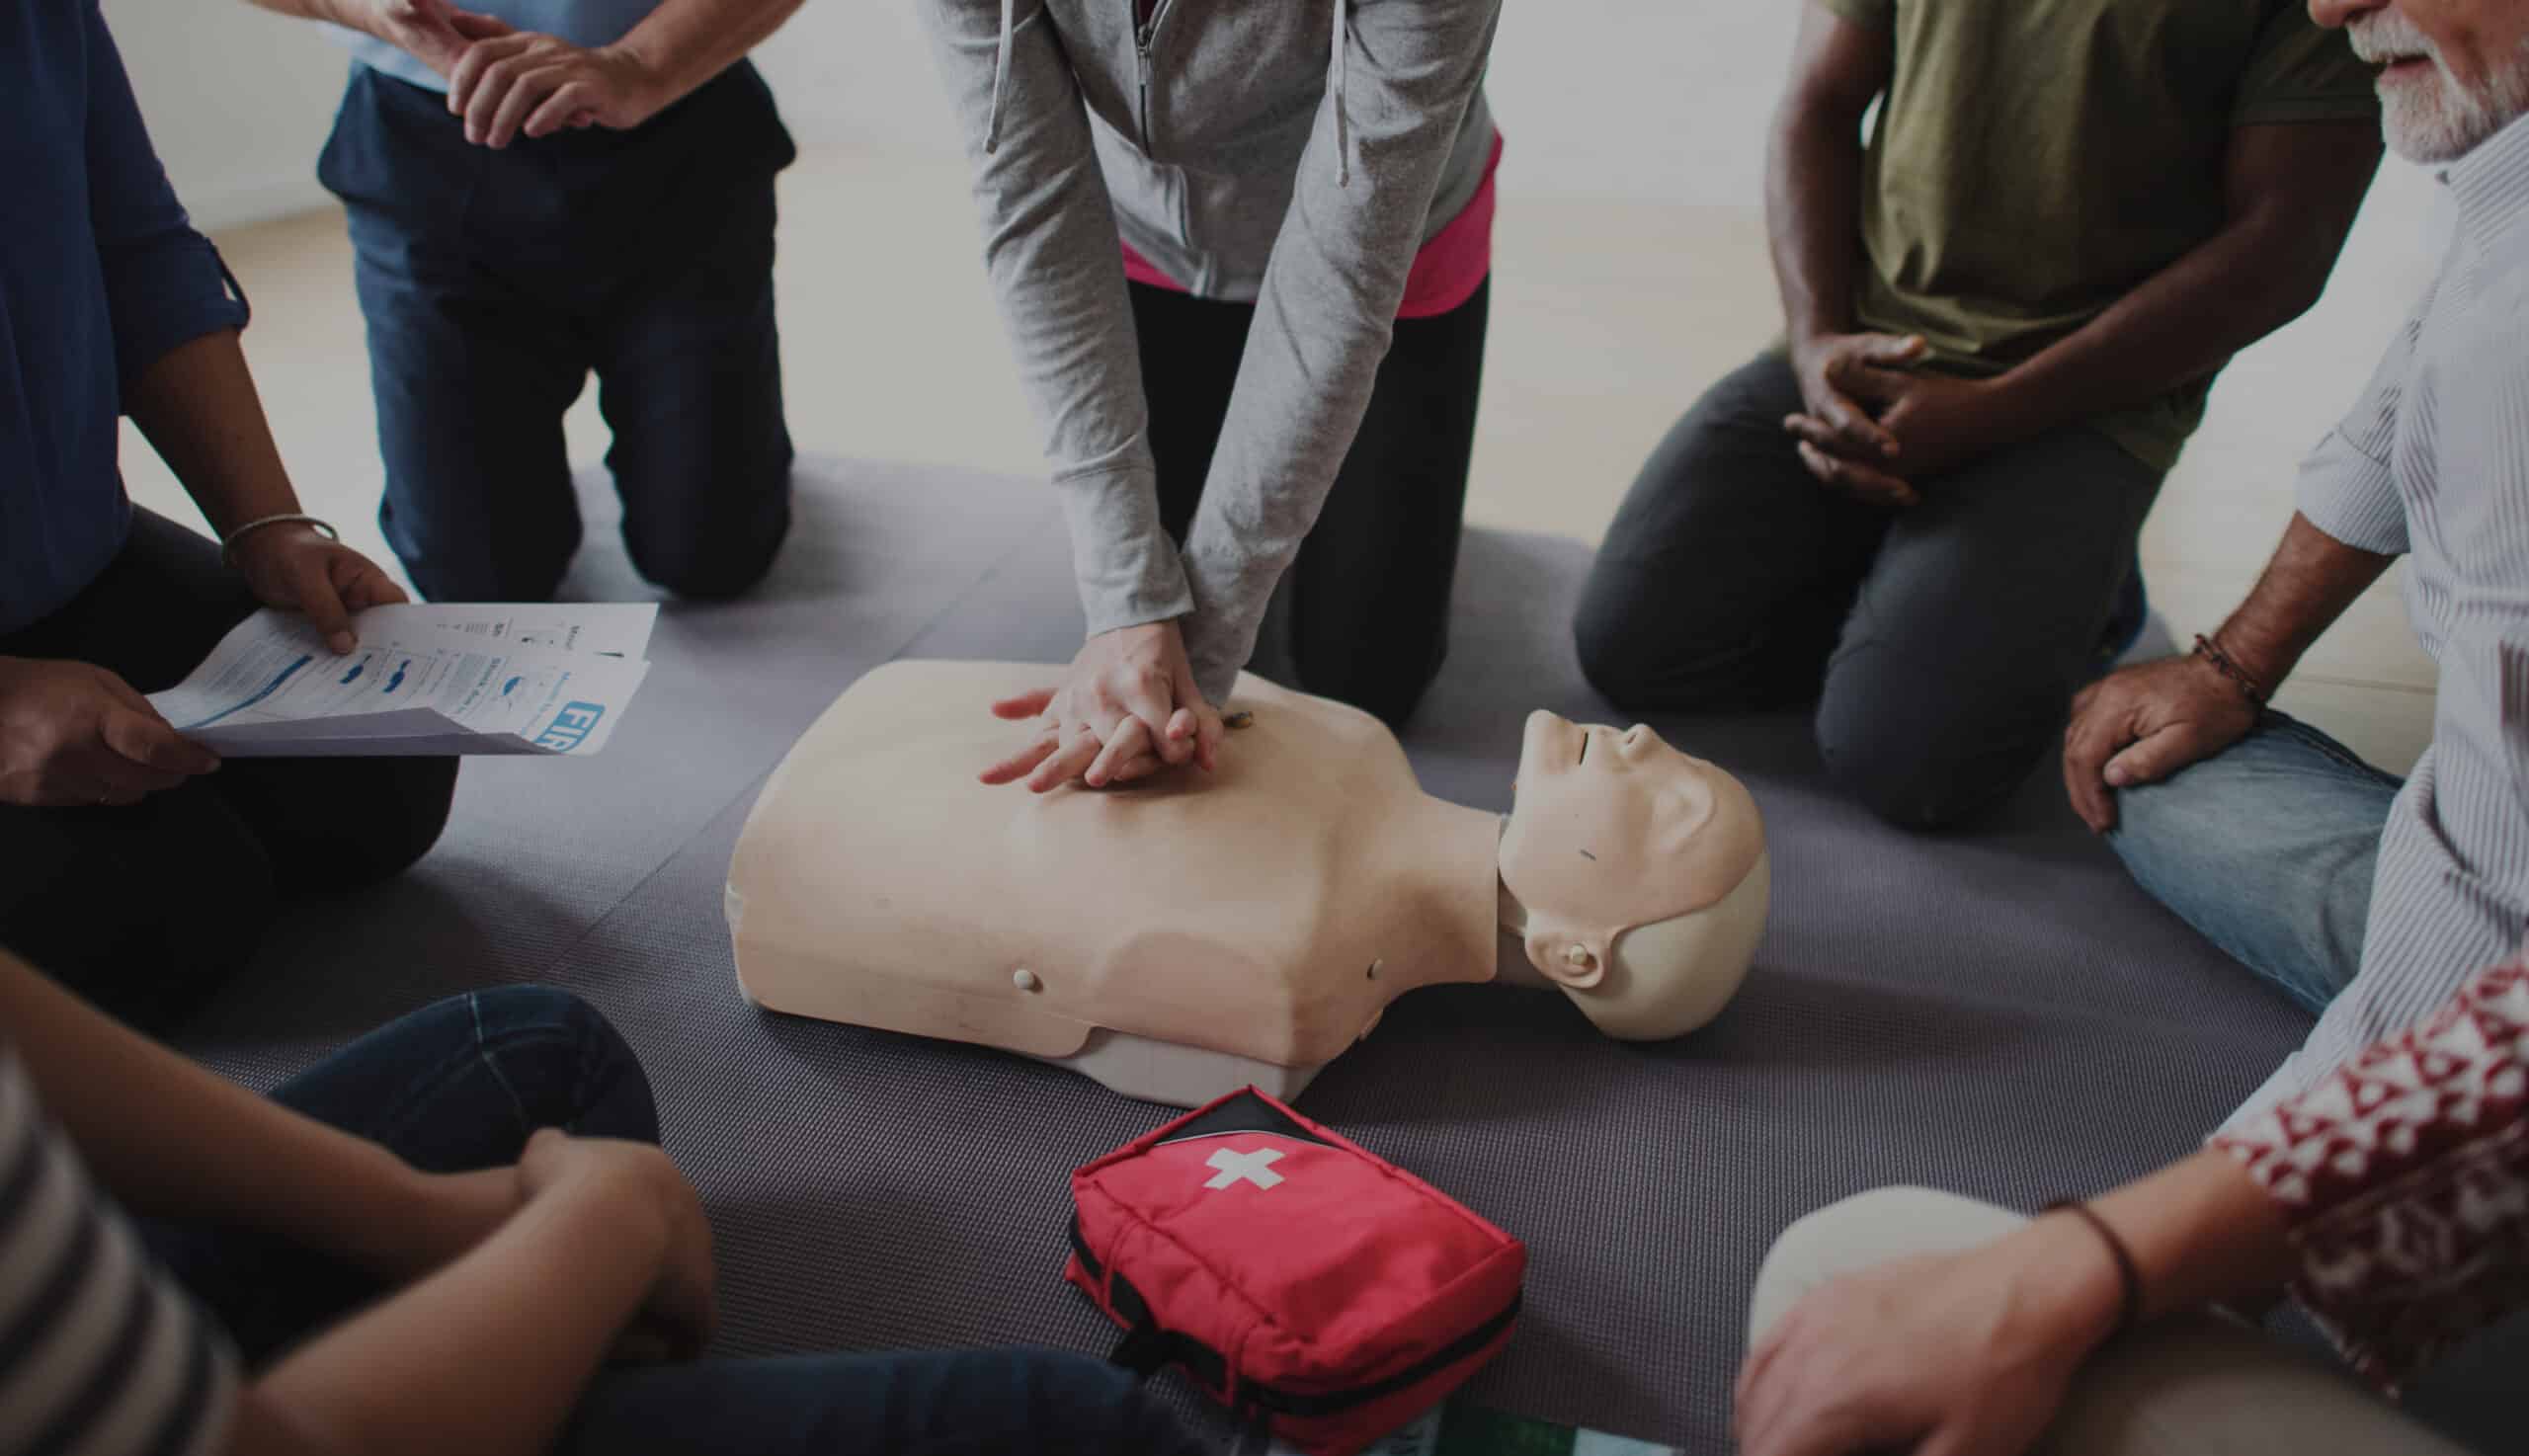 Instructor demonstrating CPR on mannequin at first aid training